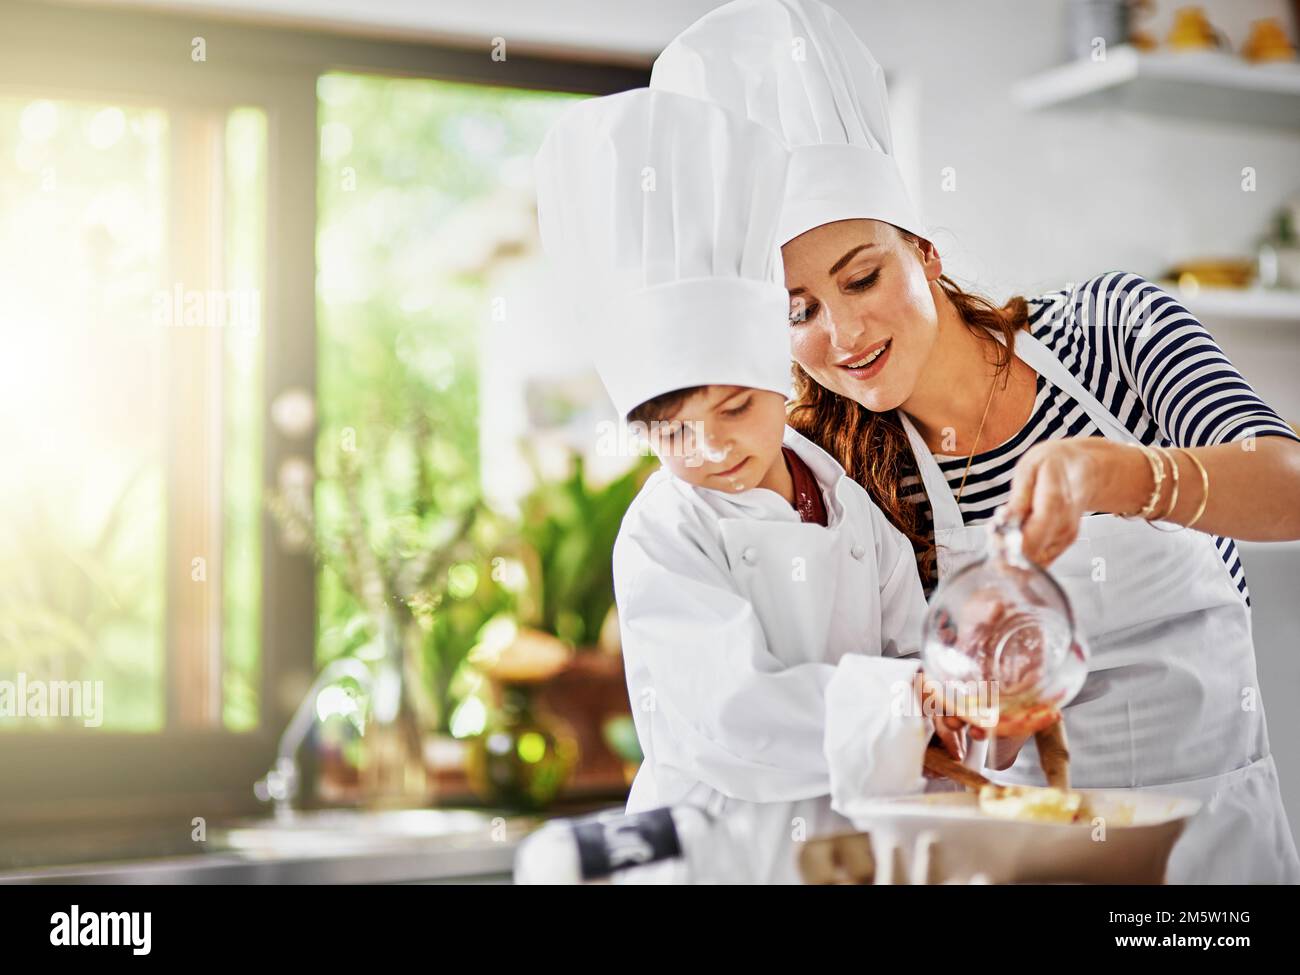 This baking class was a good idea for some bonding. a mother and her son baking in the kitchen. Stock Photo